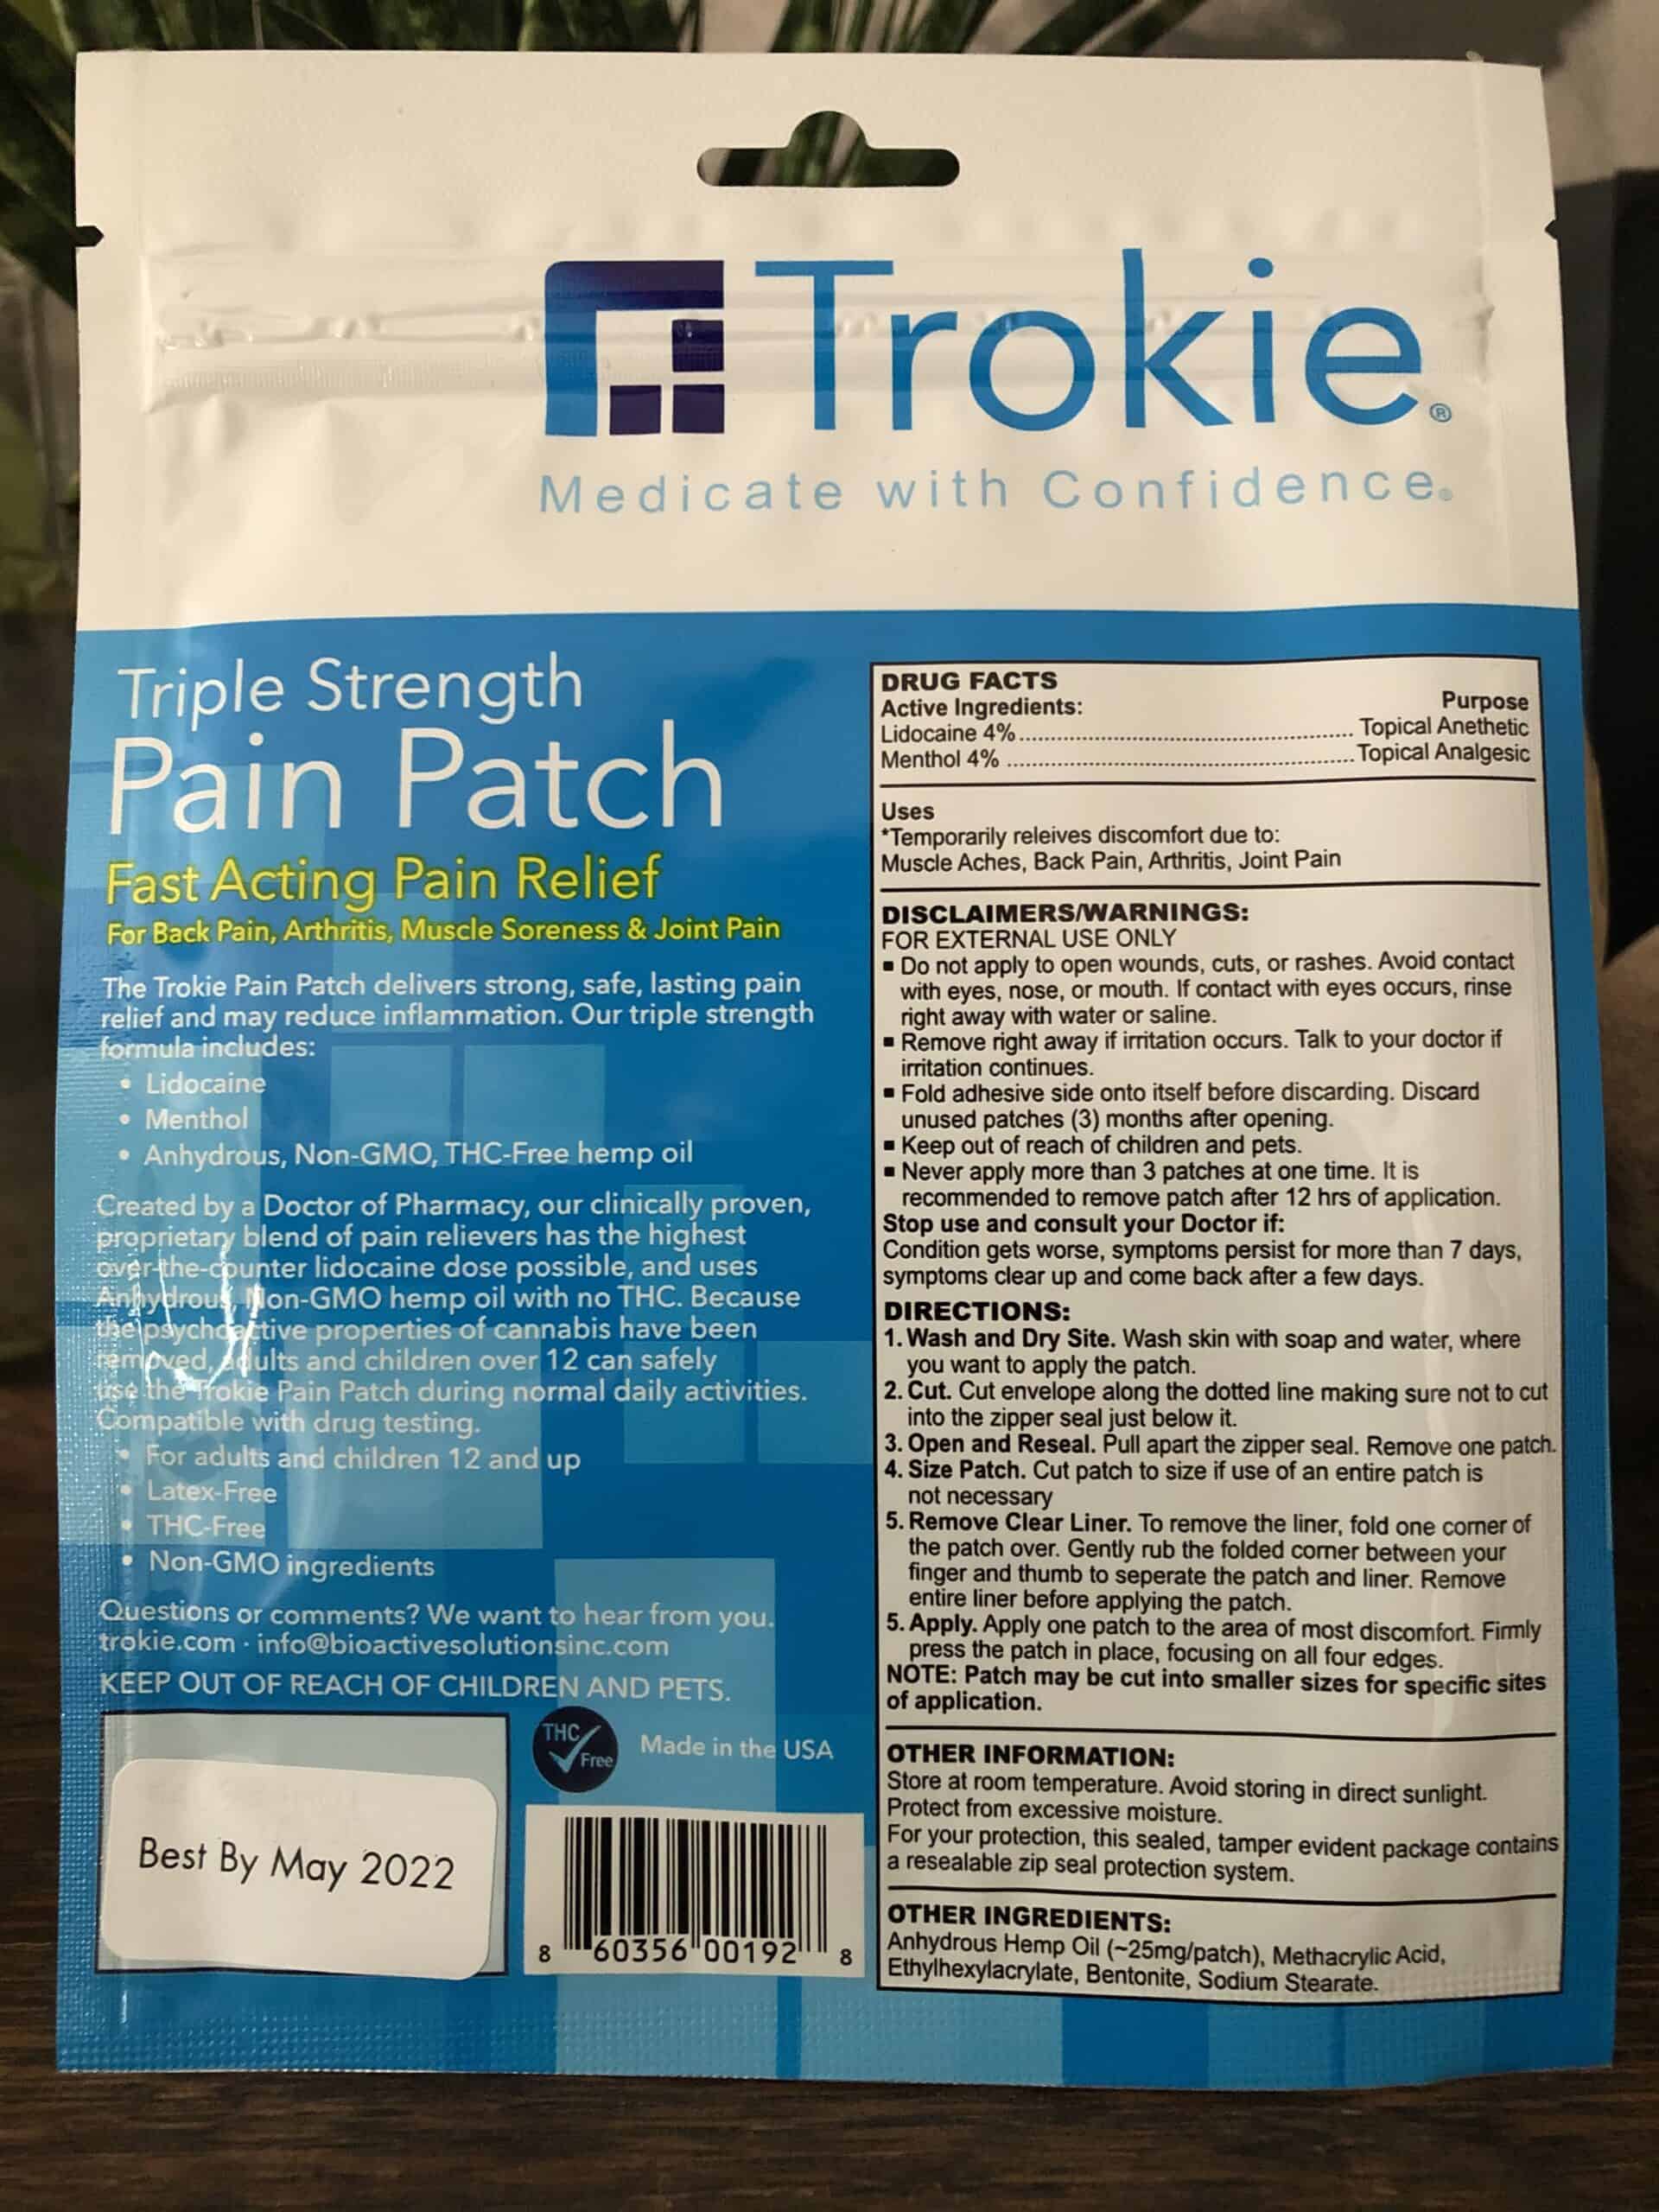 Trokie Review of Triple Strength Pain Patch - Specifications